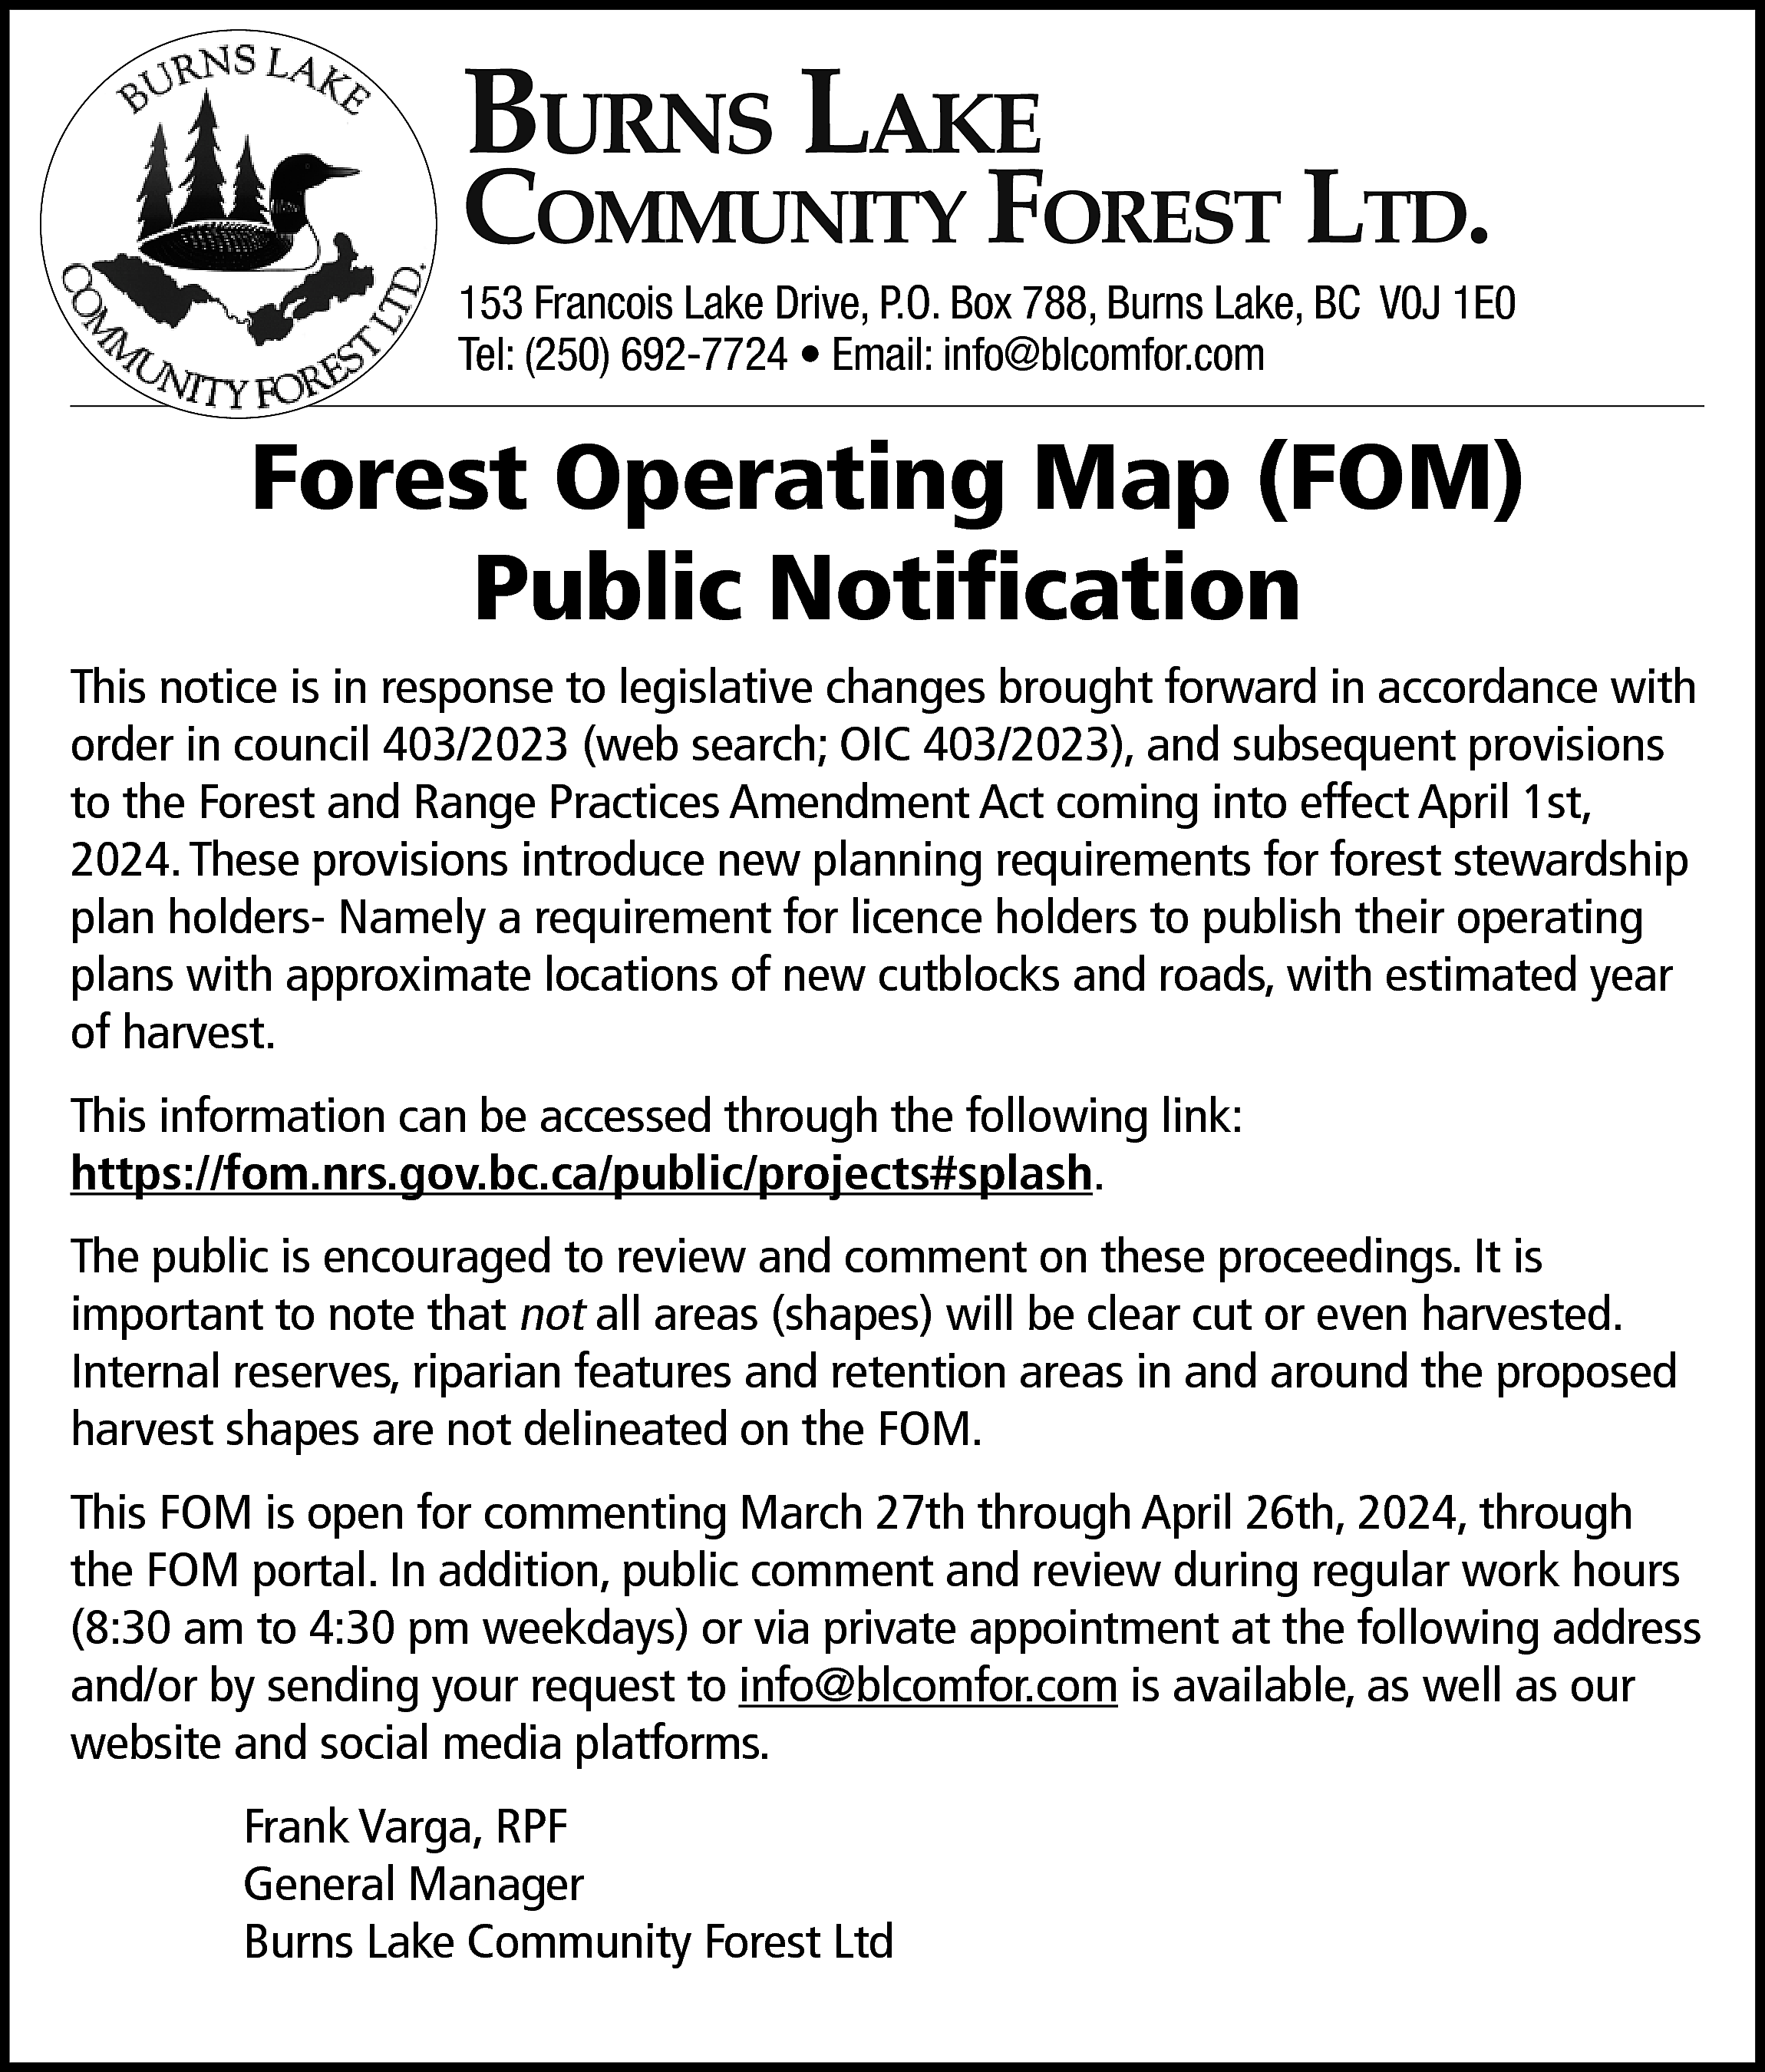 Burns Lake <br> <br>Community Forest  Burns Lake    Community Forest Ltd.    153 Francois Lake Drive, P.O. Box 788, Burns Lake, BC V0J 1E0  Tel: (250) 692-7724 • Email: info@blcomfor.com    Forest Operating Map (FOM)  Public Notification  This notice is in response to legislative changes brought forward in accordance with  order in council 403/2023 (web search; OIC 403/2023), and subsequent provisions  to the Forest and Range Practices Amendment Act coming into effect April 1st,  2024. These provisions introduce new planning requirements for forest stewardship  plan holders- Namely a requirement for licence holders to publish their operating  plans with approximate locations of new cutblocks and roads, with estimated year  of harvest.  This information can be accessed through the following link:  https://fom.nrs.gov.bc.ca/public/projects#splash.  The public is encouraged to review and comment on these proceedings. It is  important to note that not all areas (shapes) will be clear cut or even harvested.  Internal reserves, riparian features and retention areas in and around the proposed  harvest shapes are not delineated on the FOM.  This FOM is open for commenting March 27th through April 26th, 2024, through  the FOM portal. In addition, public comment and review during regular work hours  (8:30 am to 4:30 pm weekdays) or via private appointment at the following address  and/or by sending your request to info@blcomfor.com is available, as well as our  website and social media platforms.  Frank Varga, RPF  General Manager  Burns Lake Community Forest Ltd    